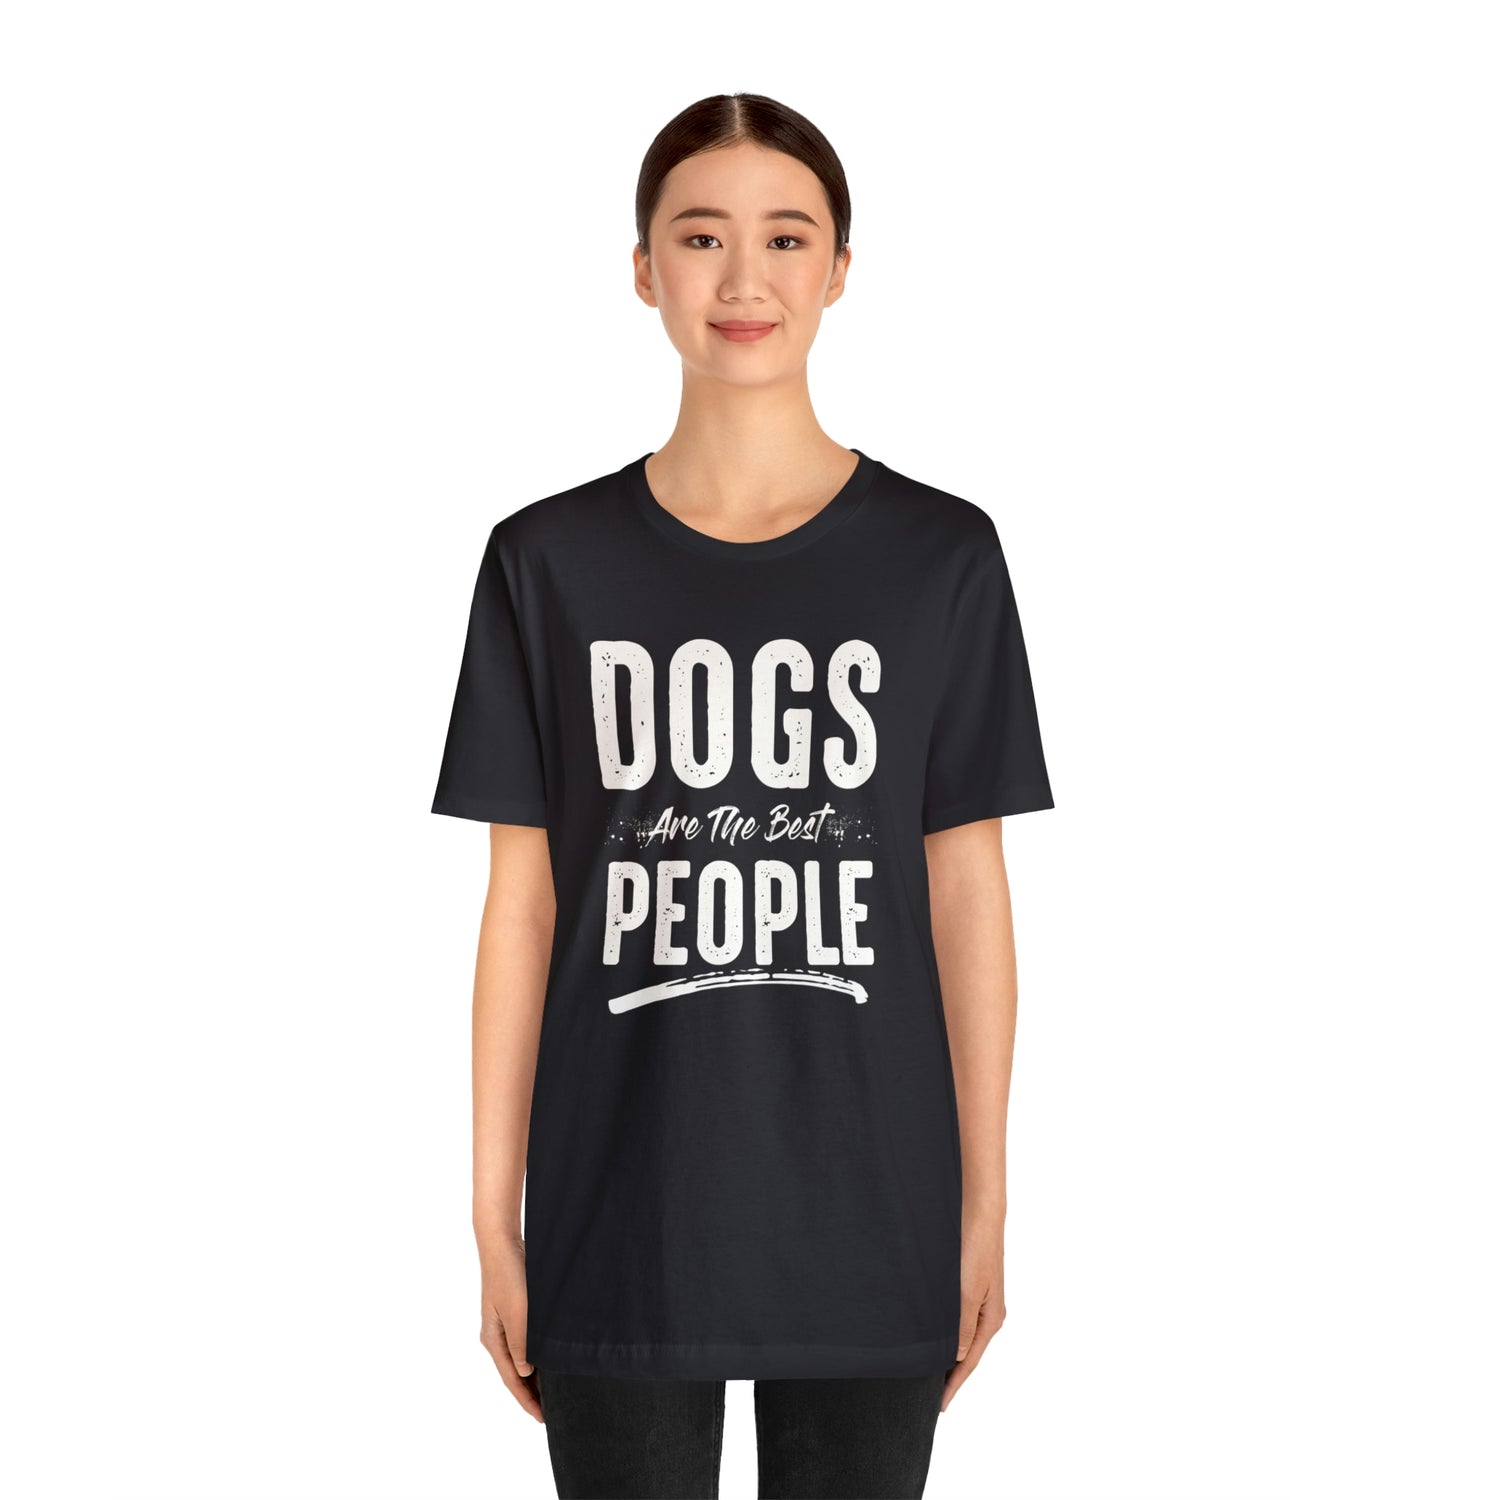 Dogs Are The Best People - Unisex Jersey Short Sleeve Tee